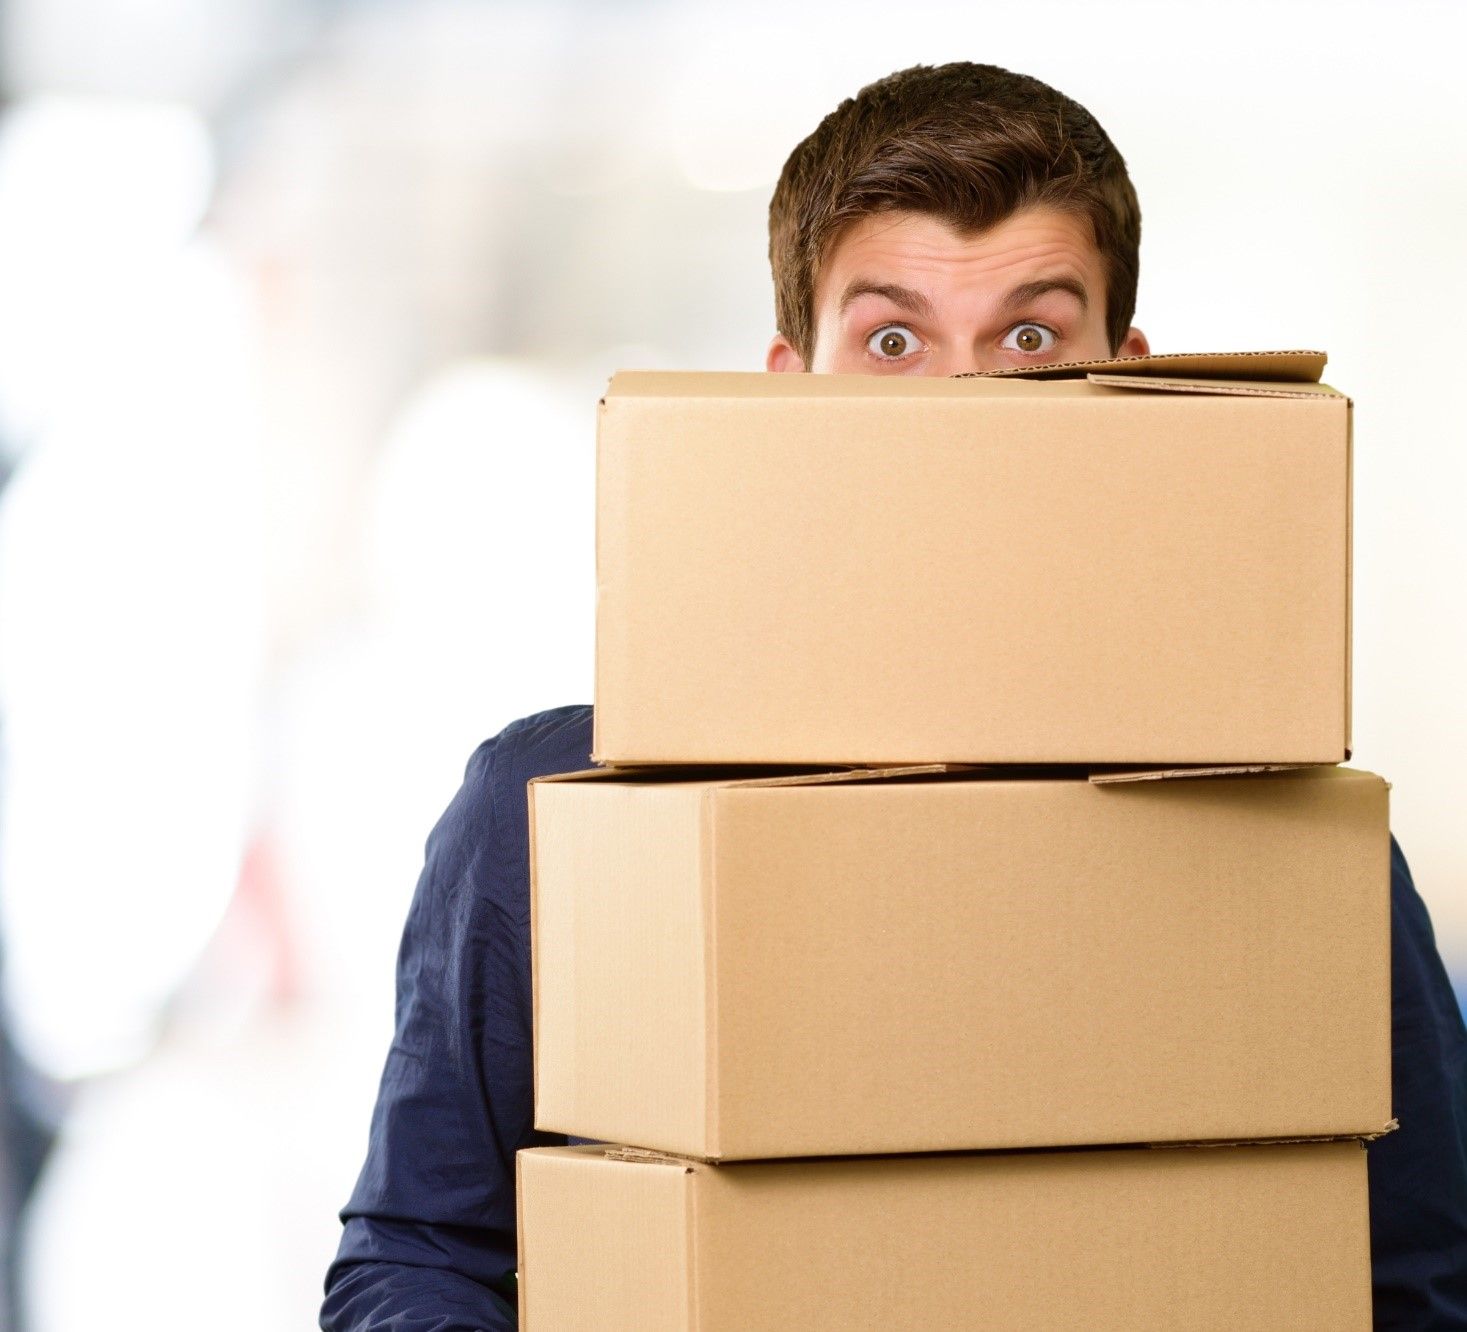 A man wearing a blue jacket with a surprised look on his face, moving 3 brown cardboard boxes.